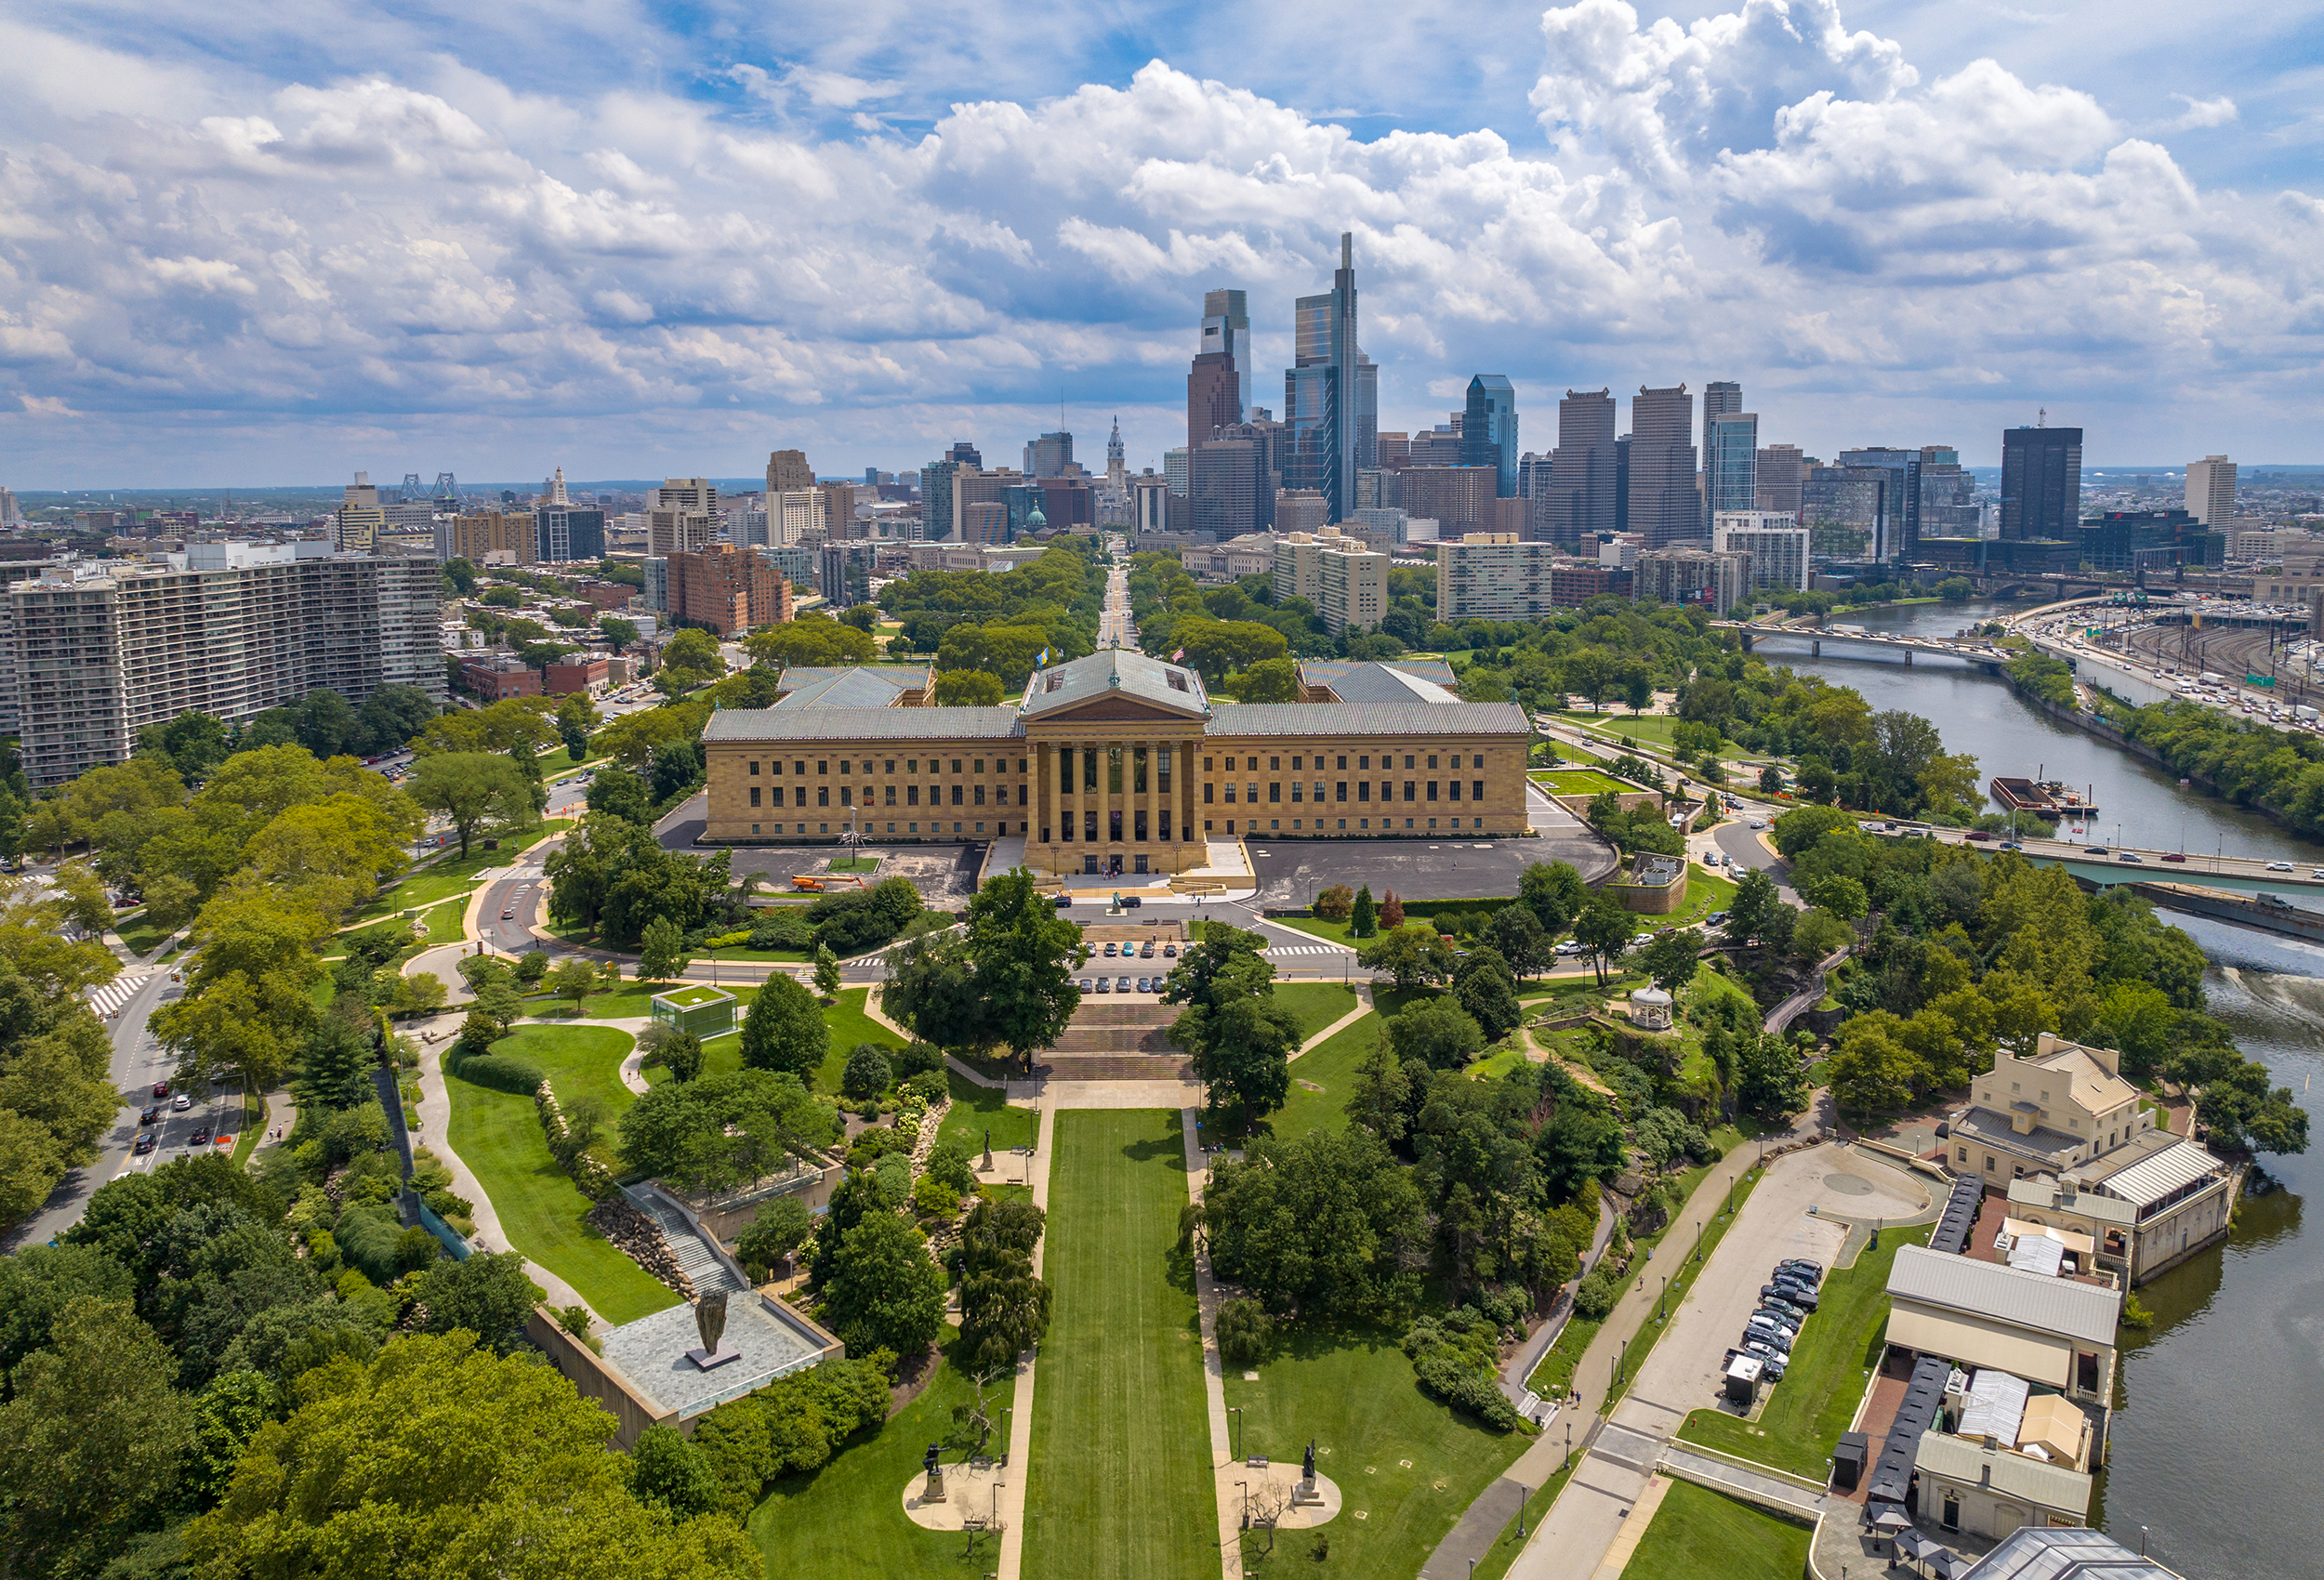 Elevated view of the Philadelphia skyline with the Philadelphia Museum of Art in the foreground and the tall city skyline in the background.